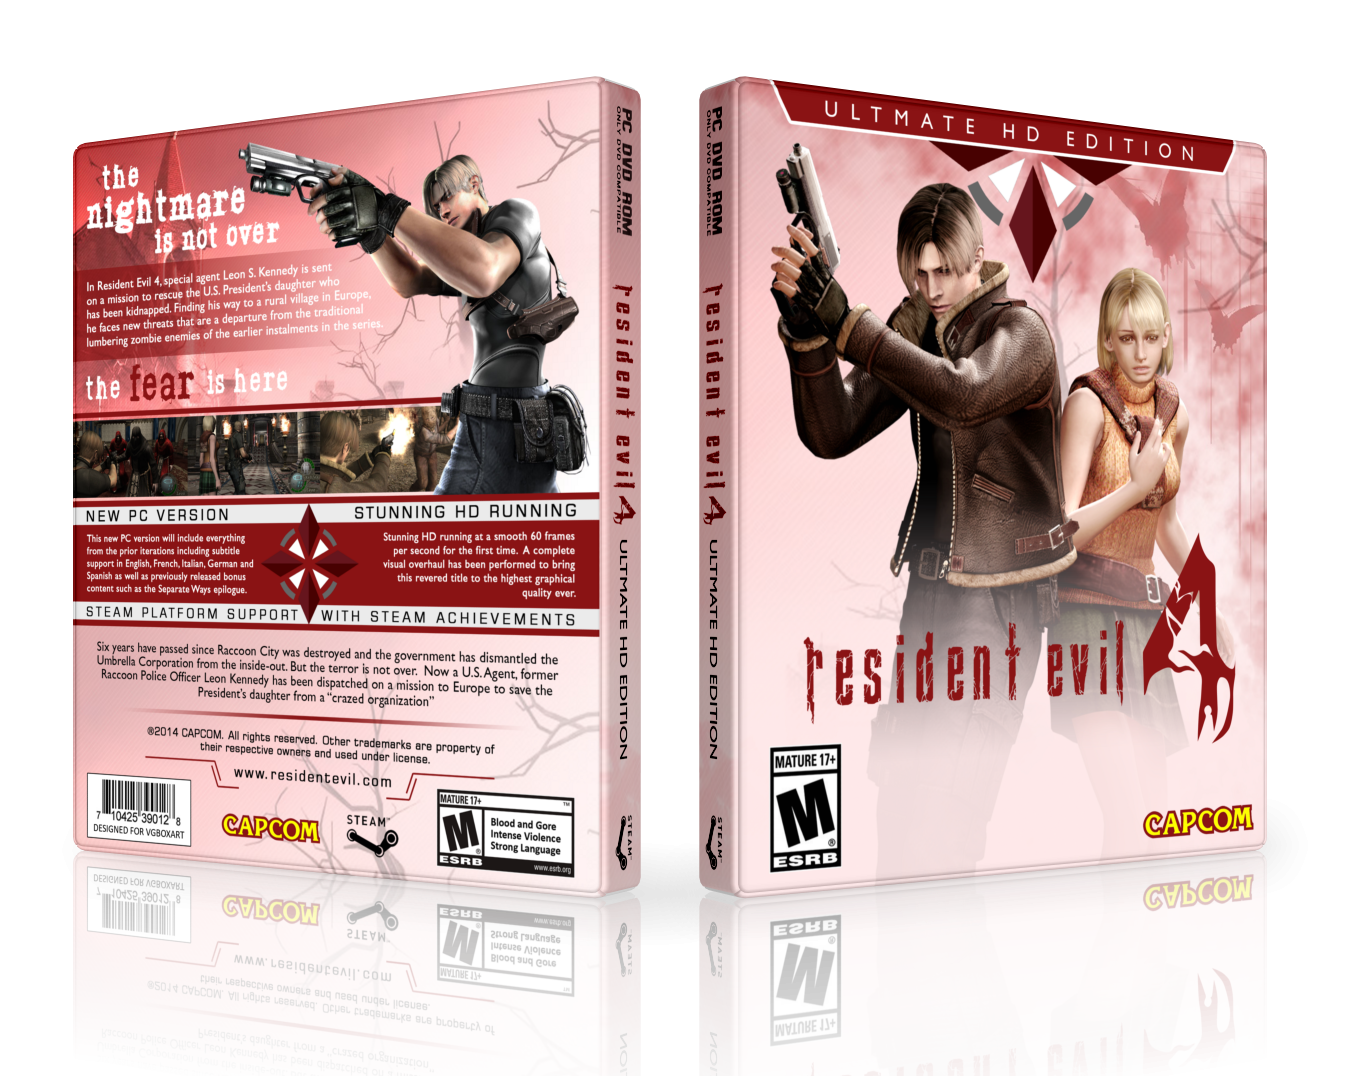 Resident Evil 4: Ultimate HD Edition box cover